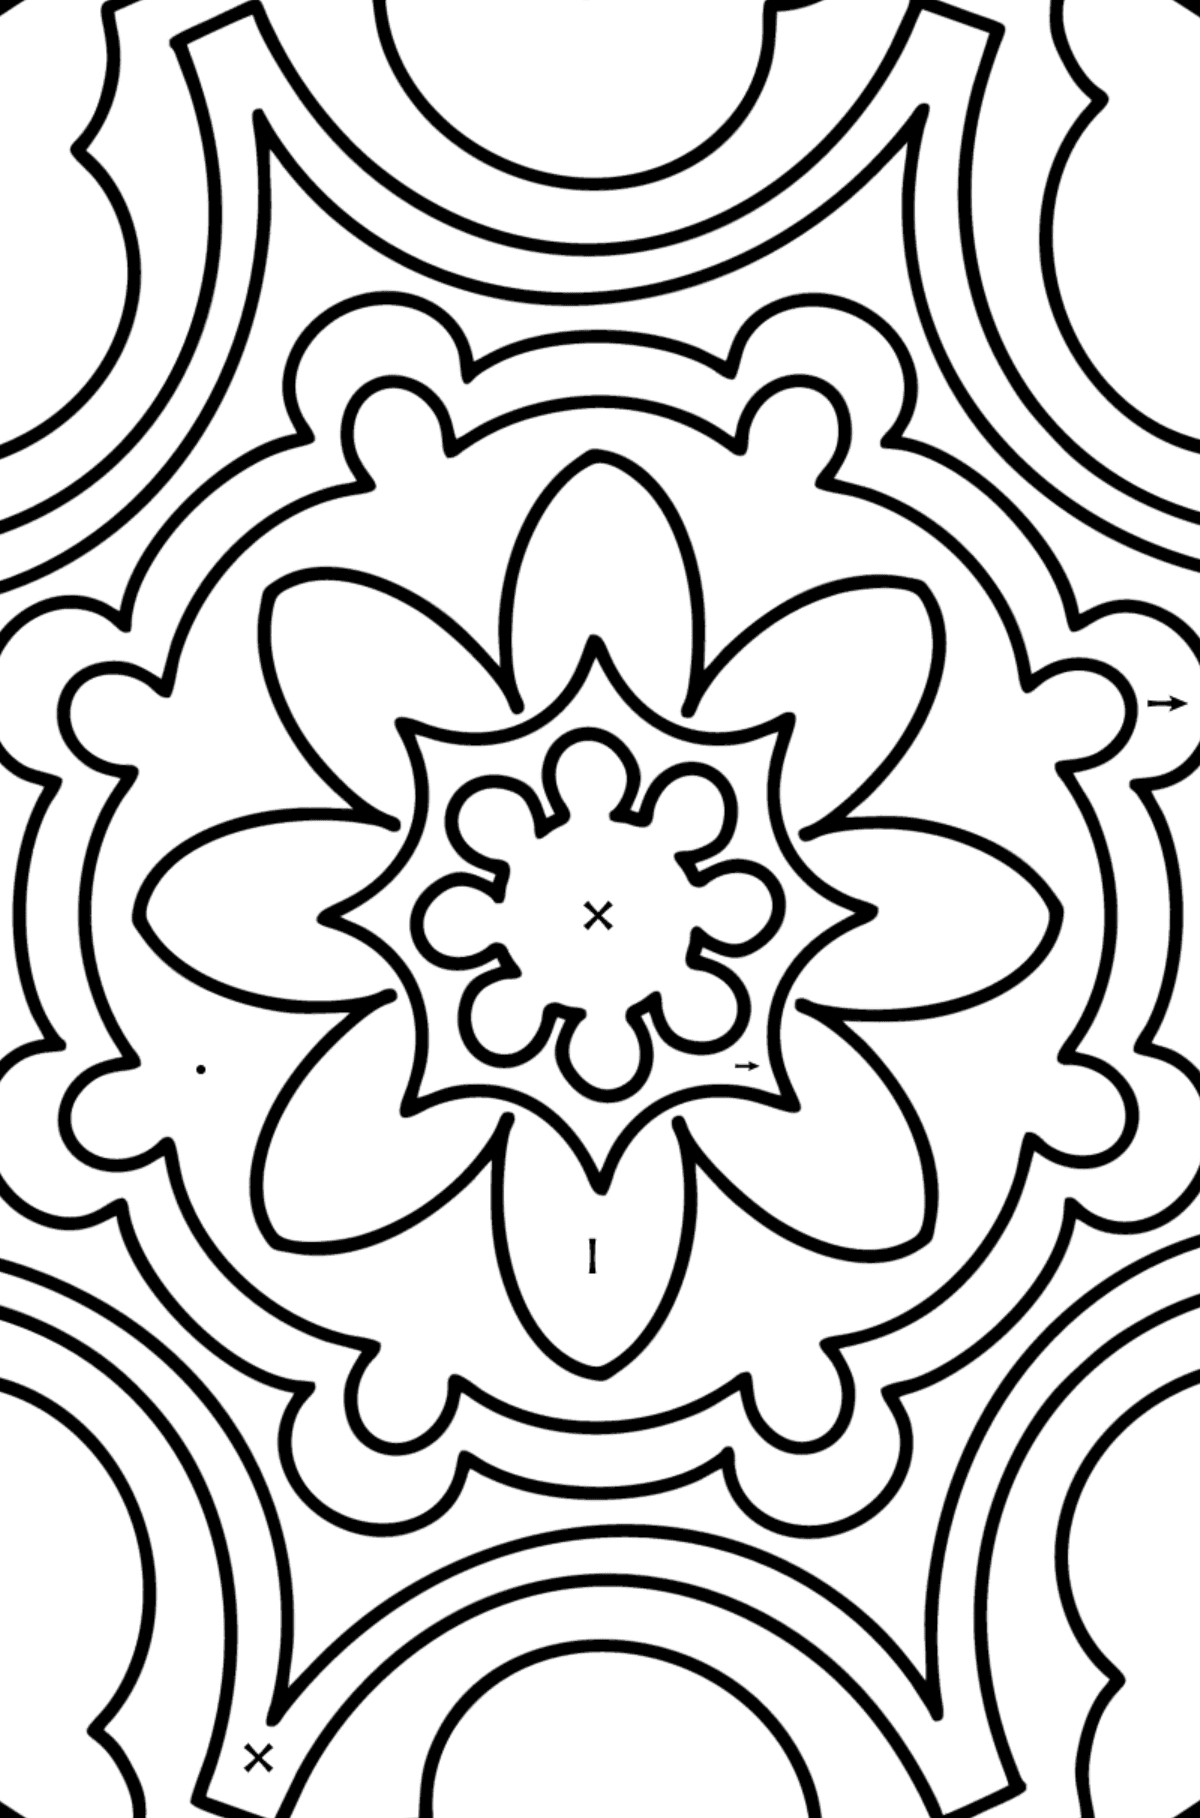 Mandala coloring page - 9 elements - Coloring by Symbols for Kids